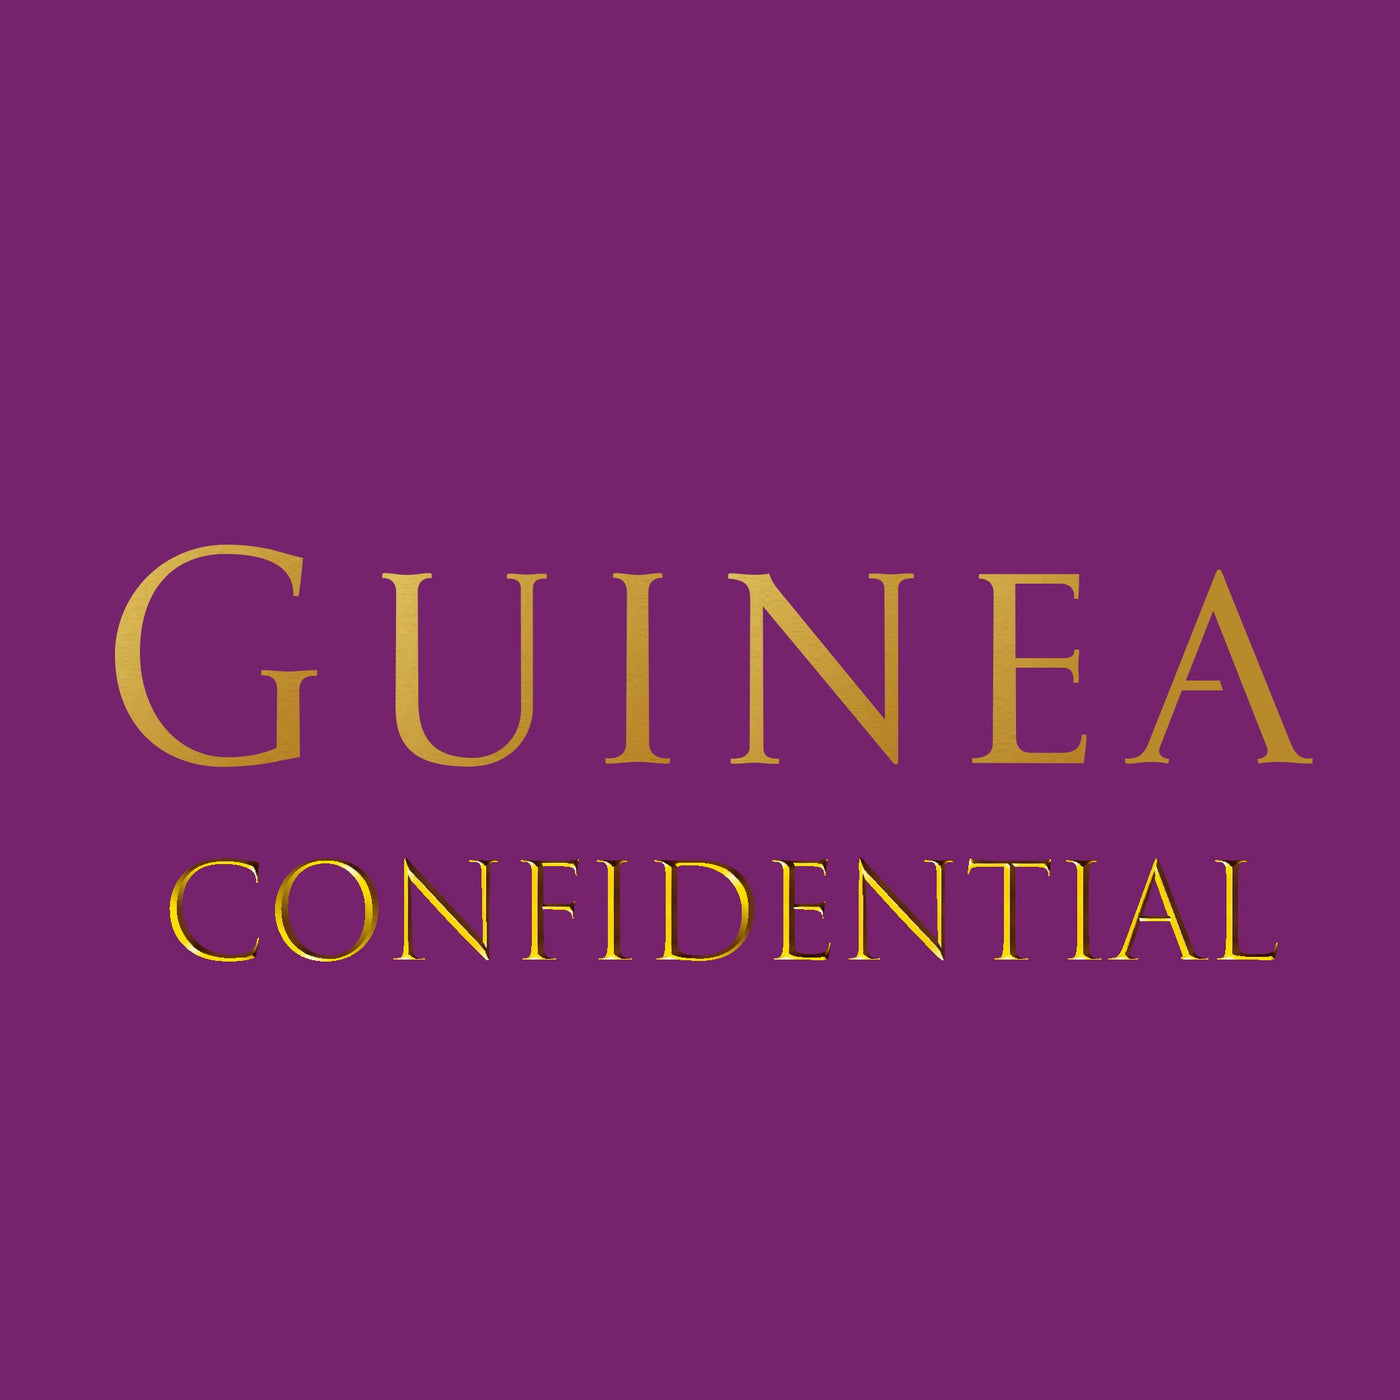 guinea confidential gold lettering on a purple background